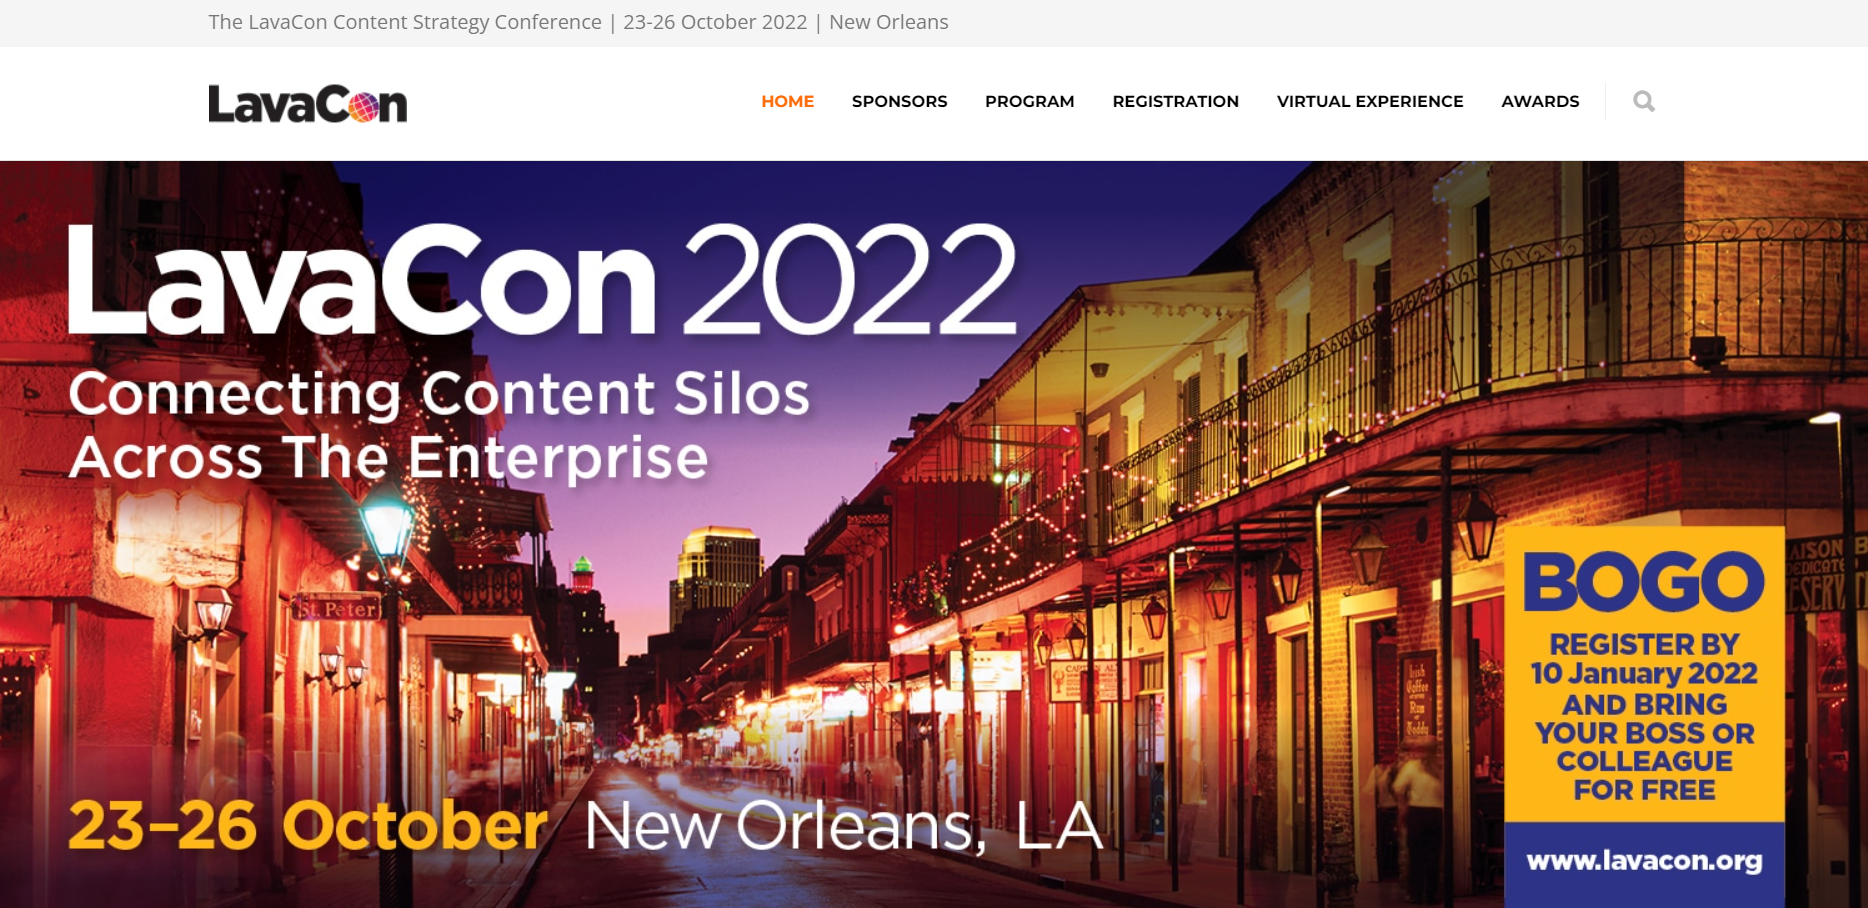 LavaCon content marketing conference in 2022